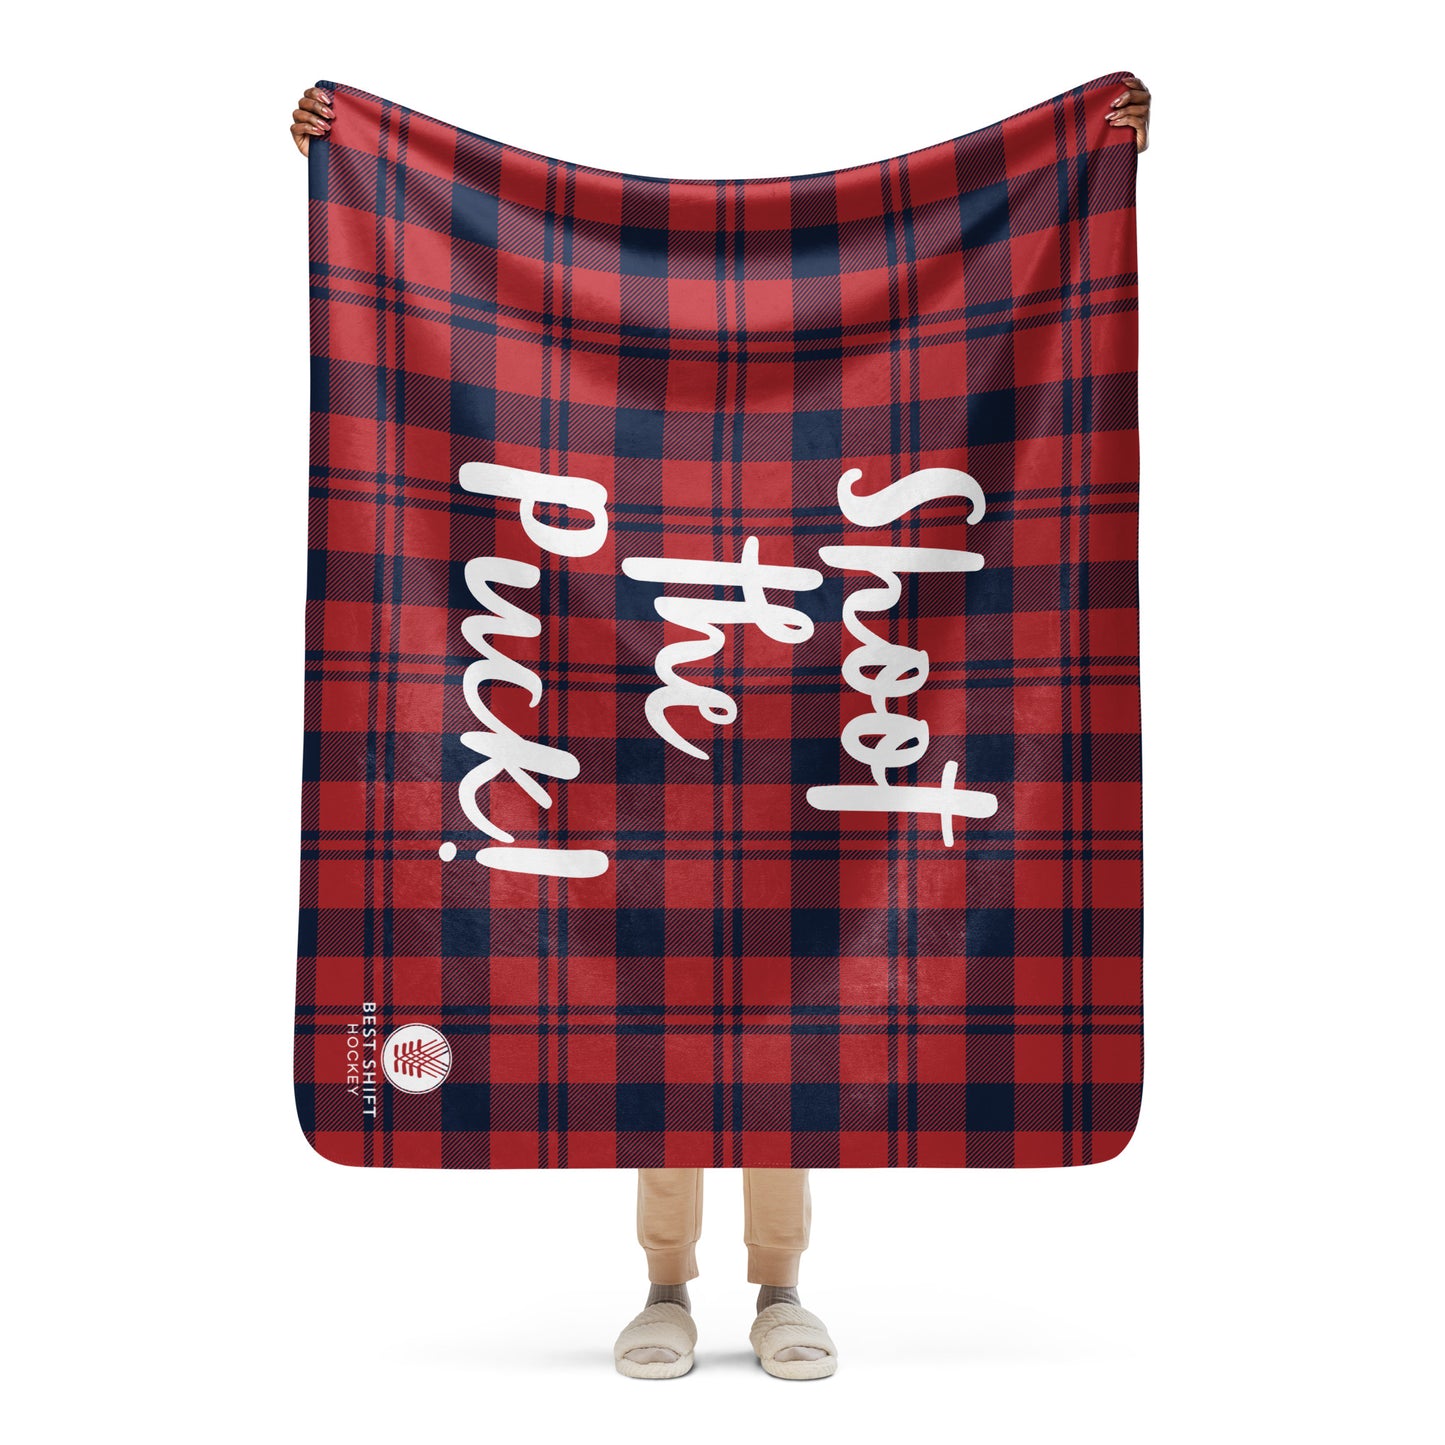 Shoot the Puck! Sherpa Blanket